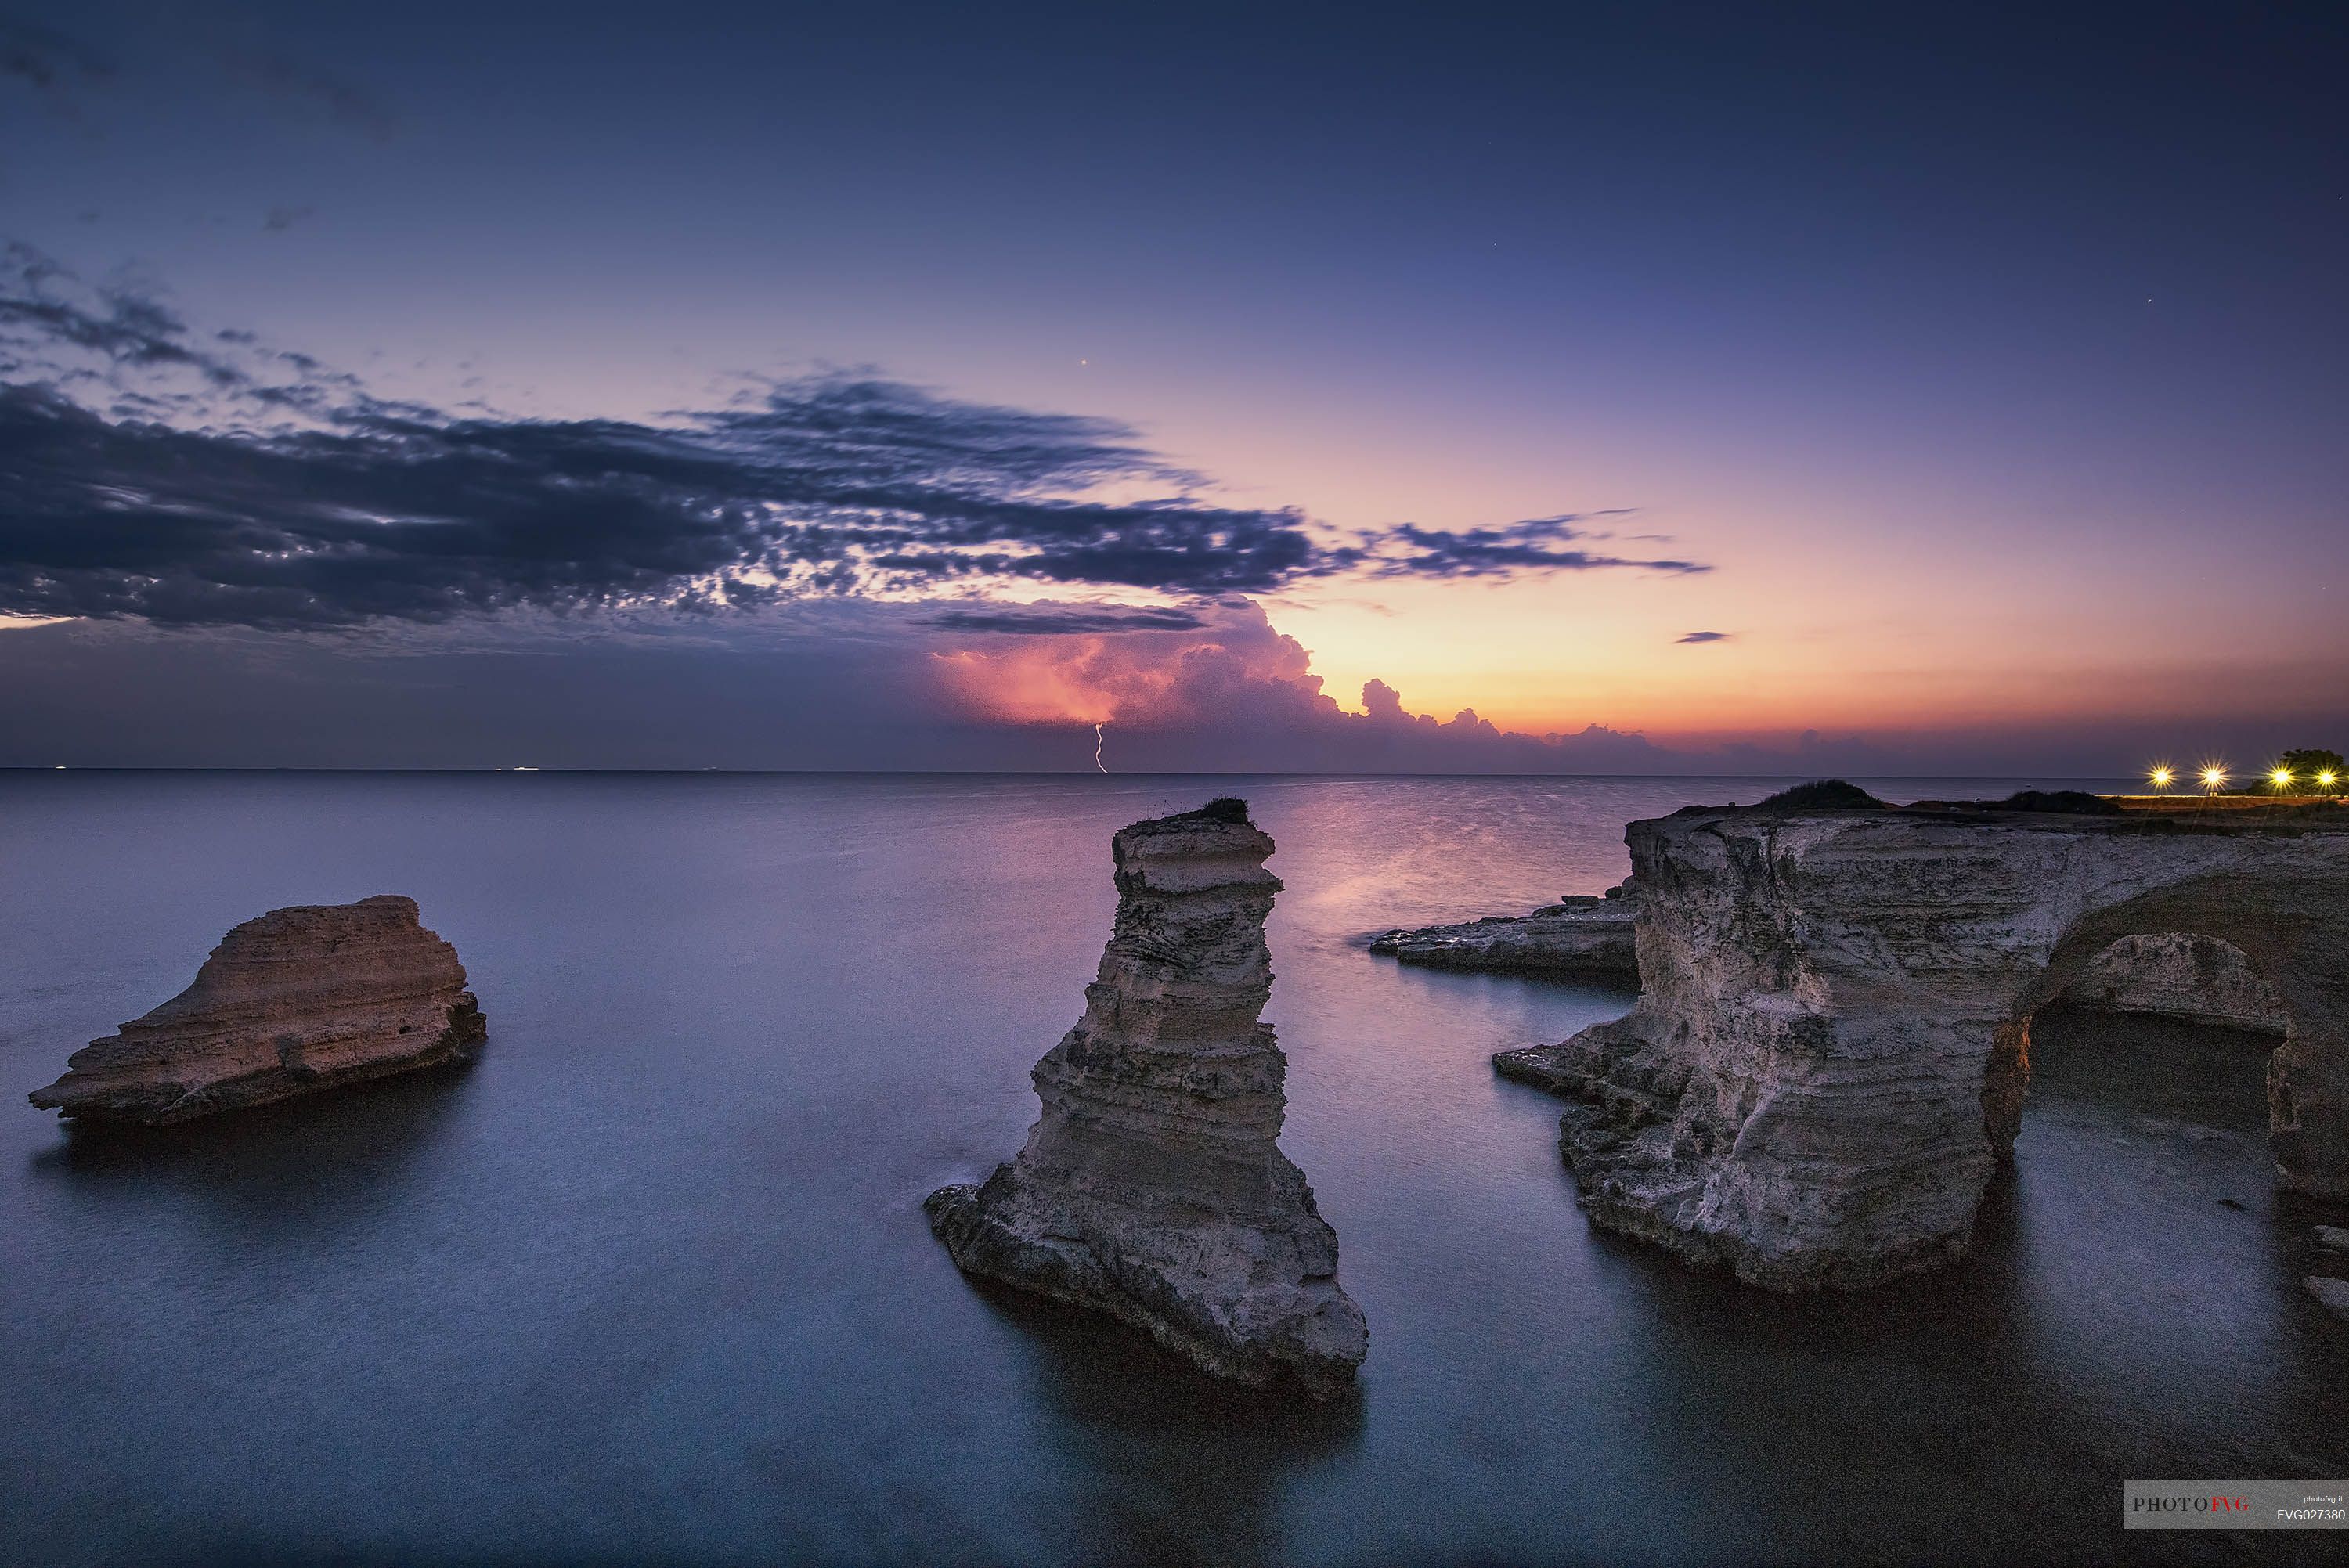 Sunrise on Torre Sant Andrea or St. Andrew's tower reefs, Salentine peninsula, Apulia, Italy